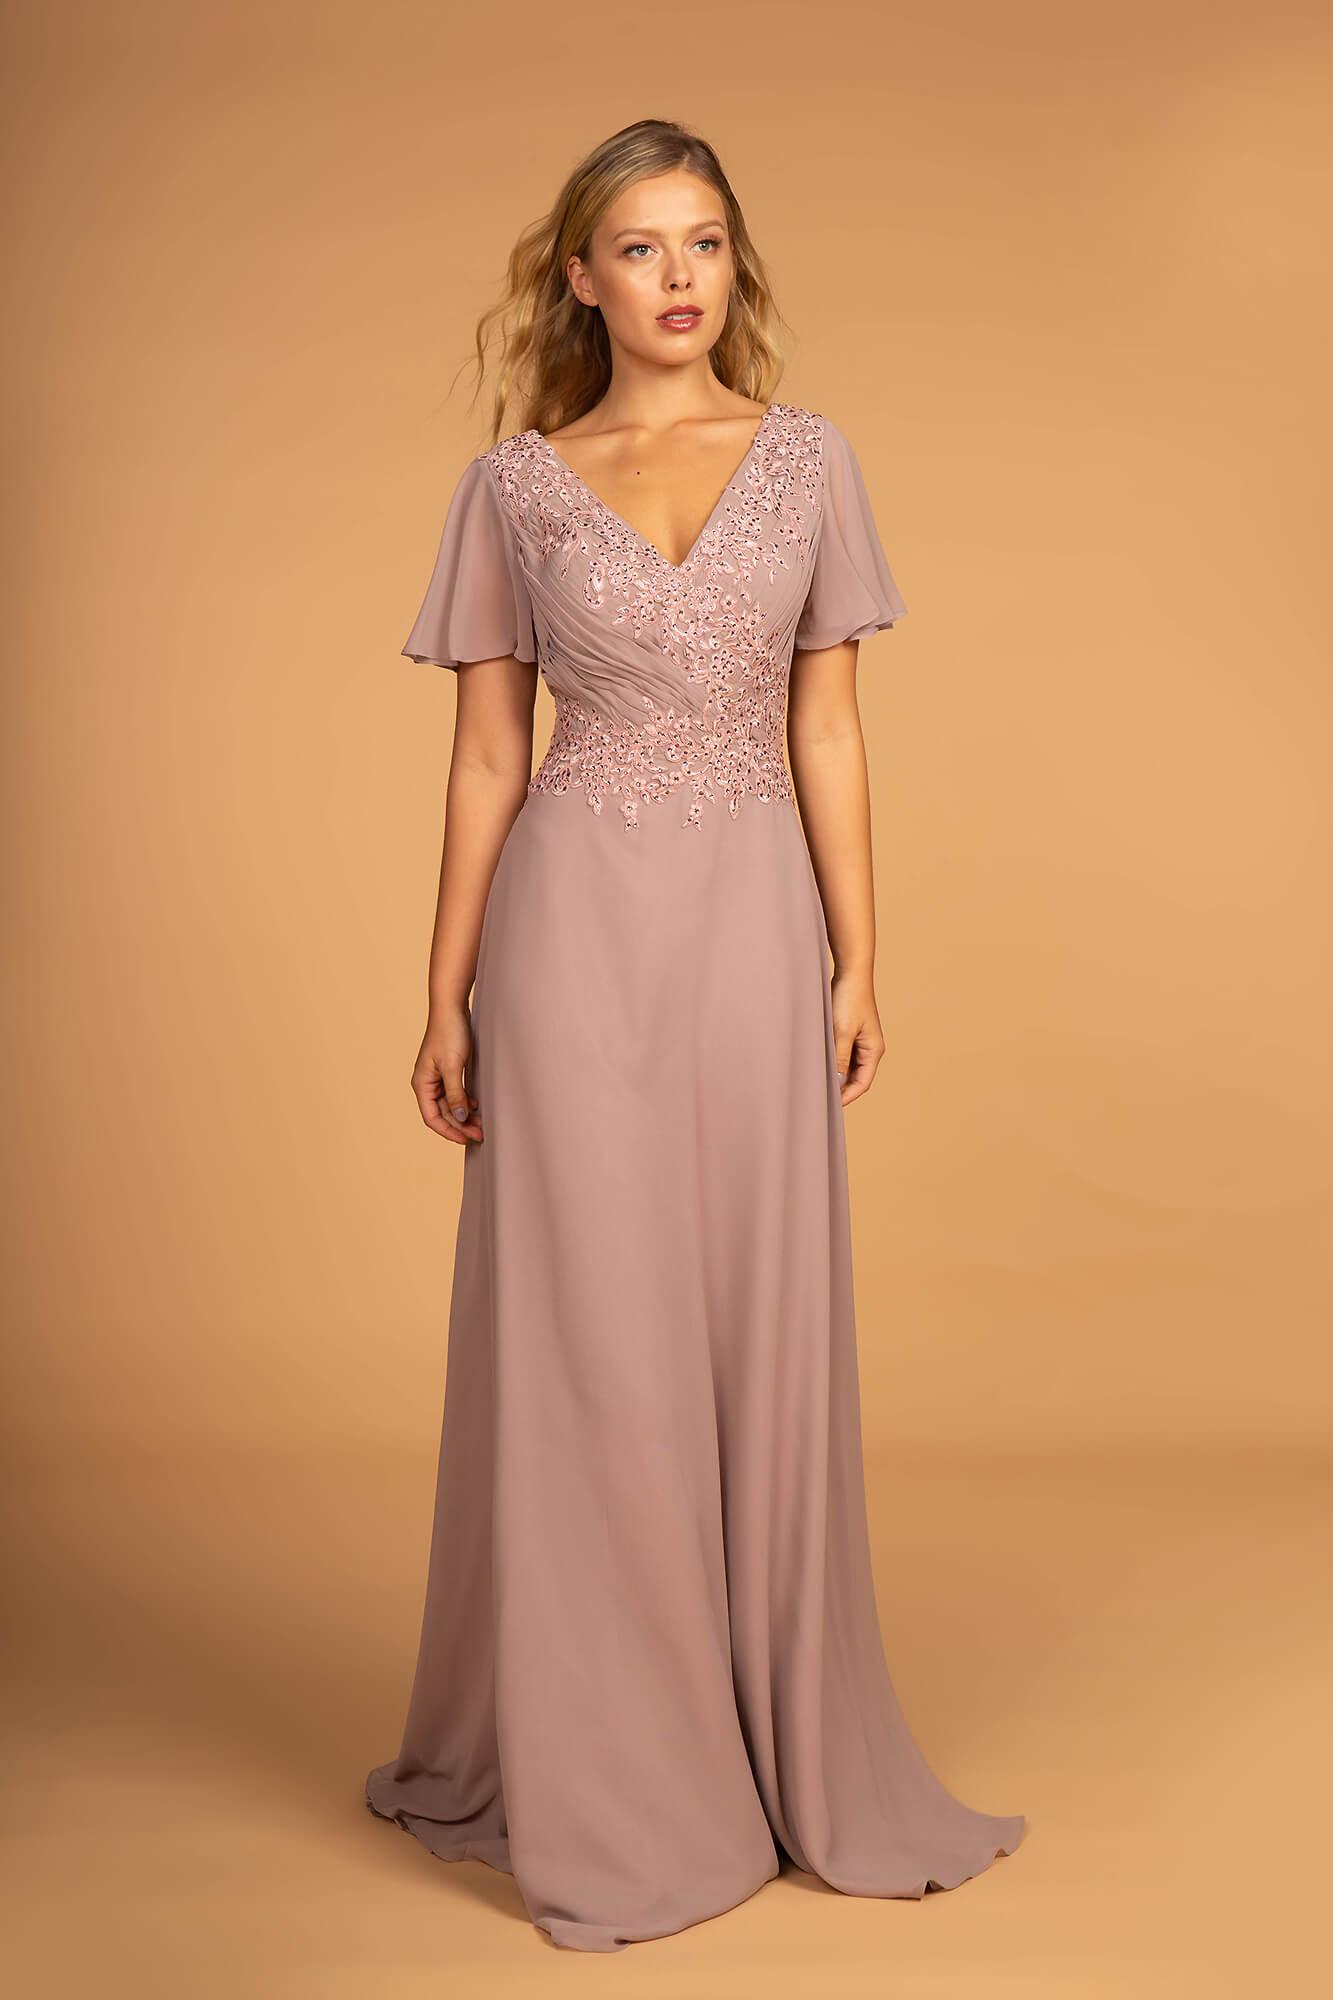 Mother of the Bride V-Neck Chiffon Long Dress Sale - The Dress Outlet